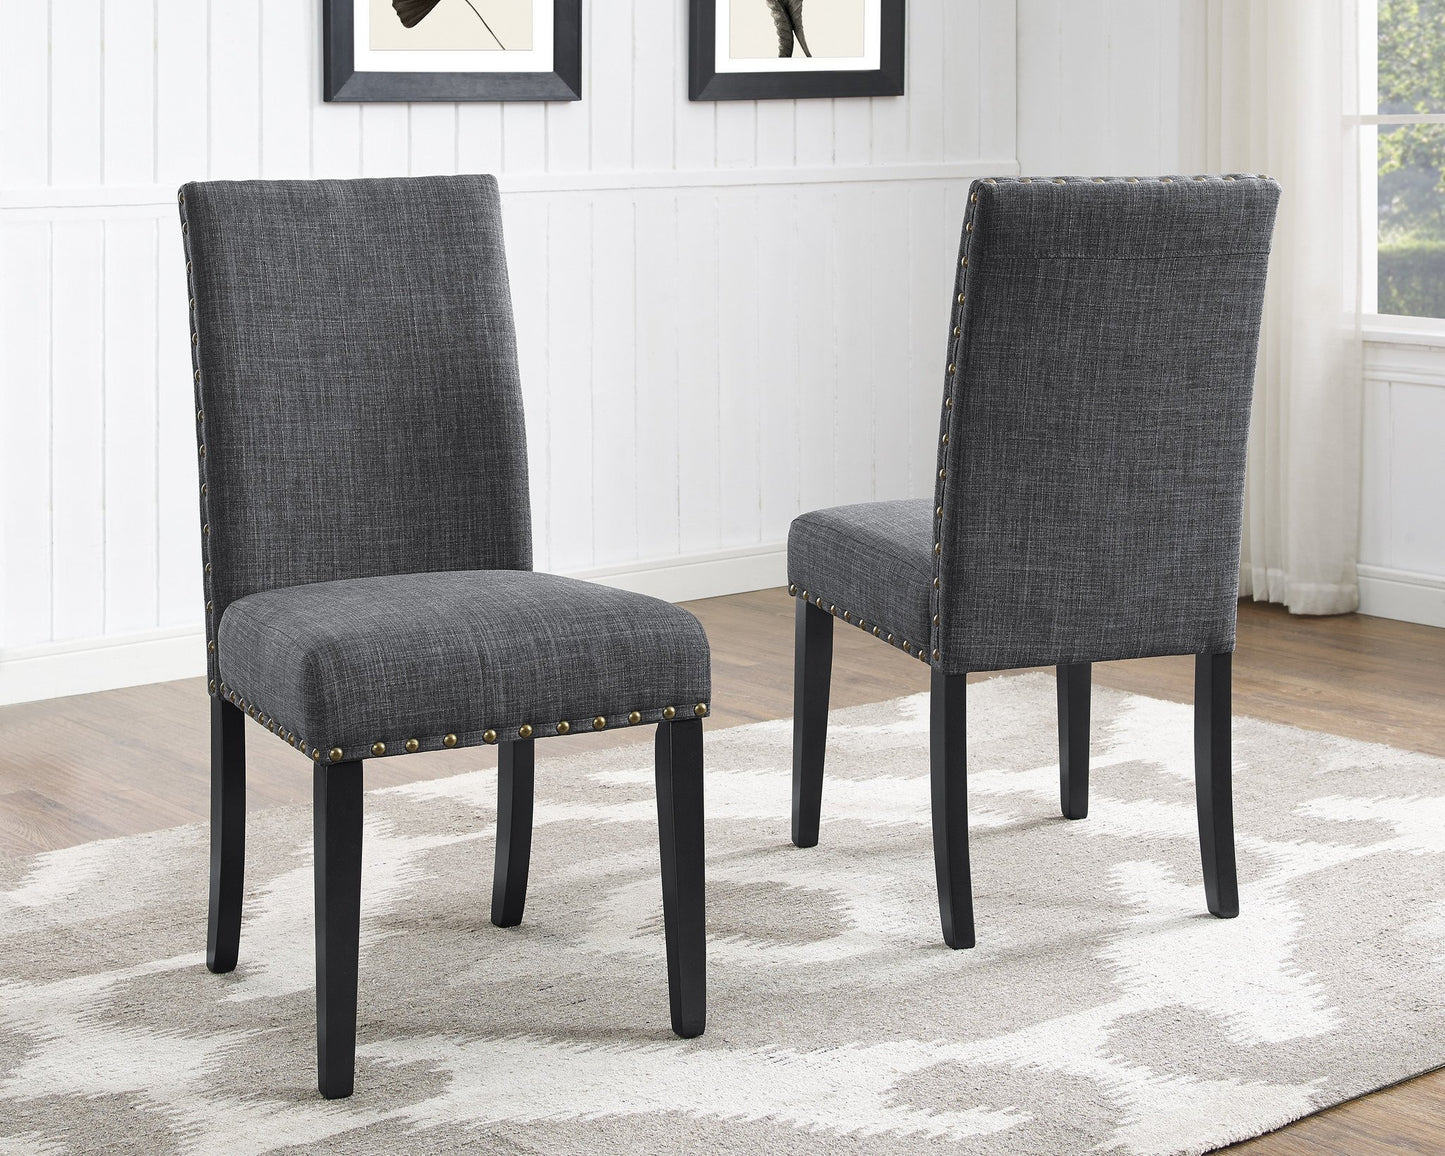 Biony Gray Fabric Dining Chairs with Nailhead Trim, Set of 2